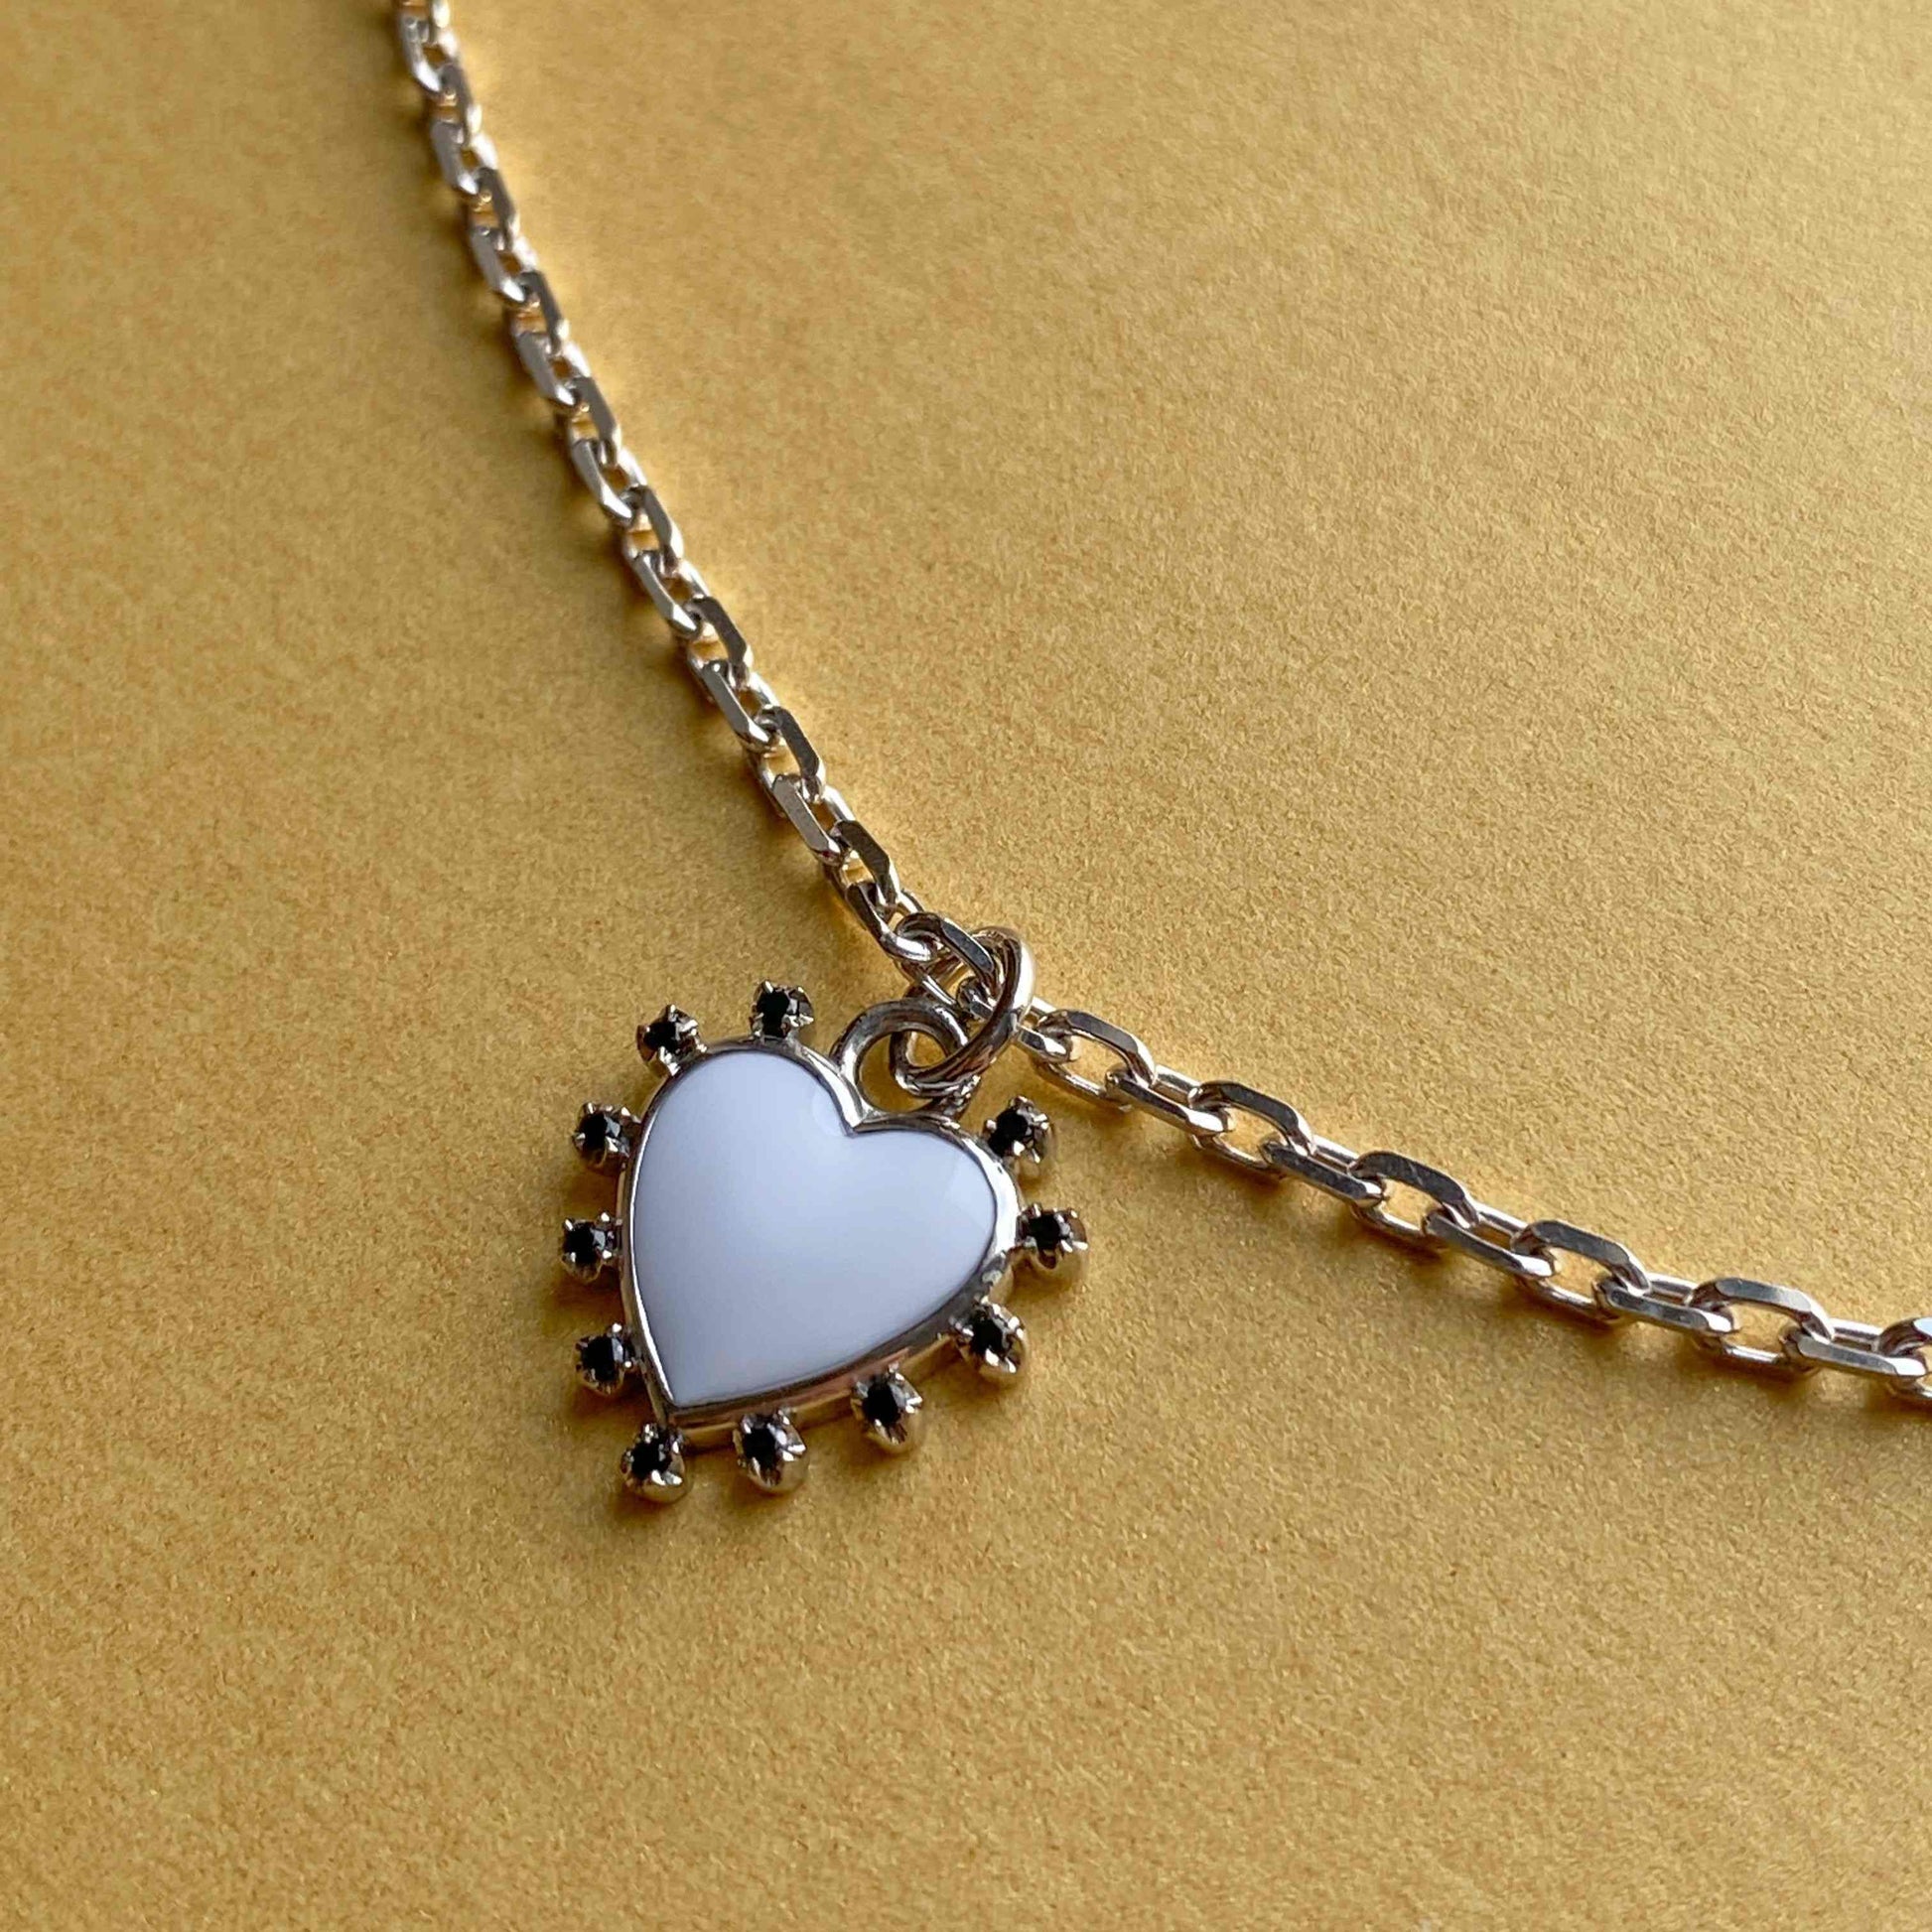 PENDANT "HEART" WITH ENAMEL & BLACK SPINEL ON A CHAIN / SILVER